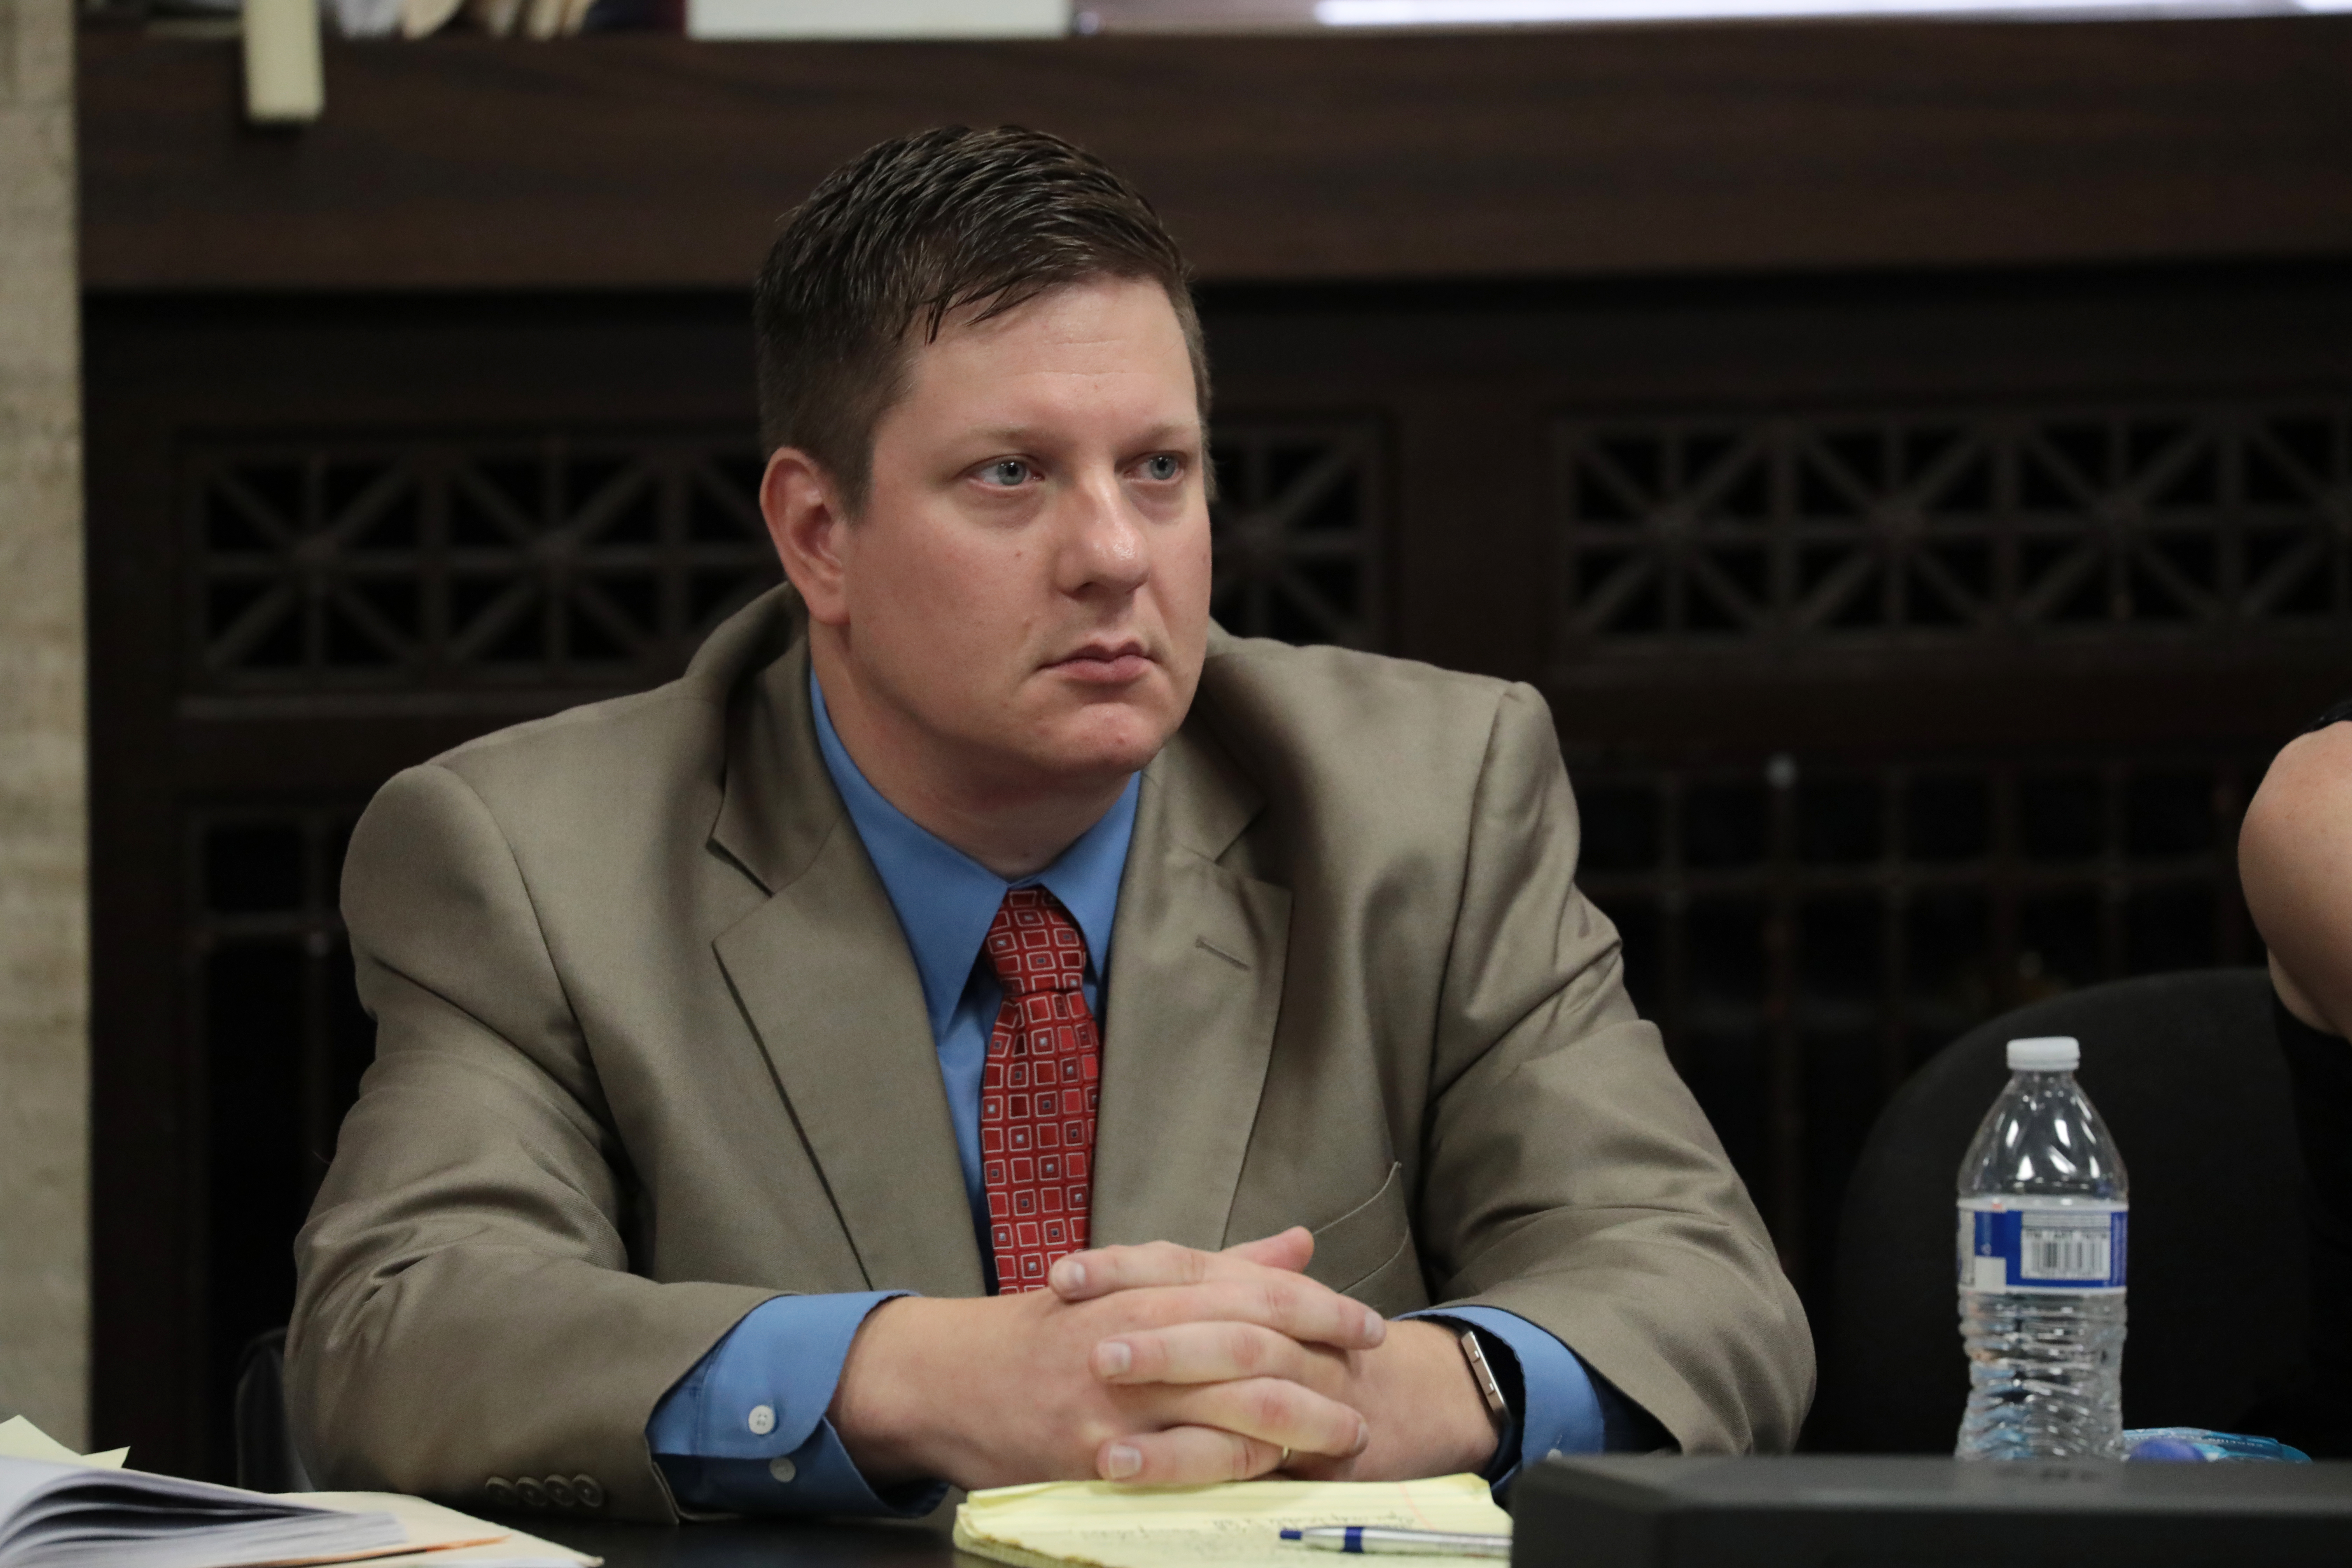 Chicago police Officer Jason Van Dyke watches the prosecution’s closing statements during his trial for the shooting death of Laquan McDonald at the Leighton Criminal Court Building on Thursday, Oct. 4, 2018.